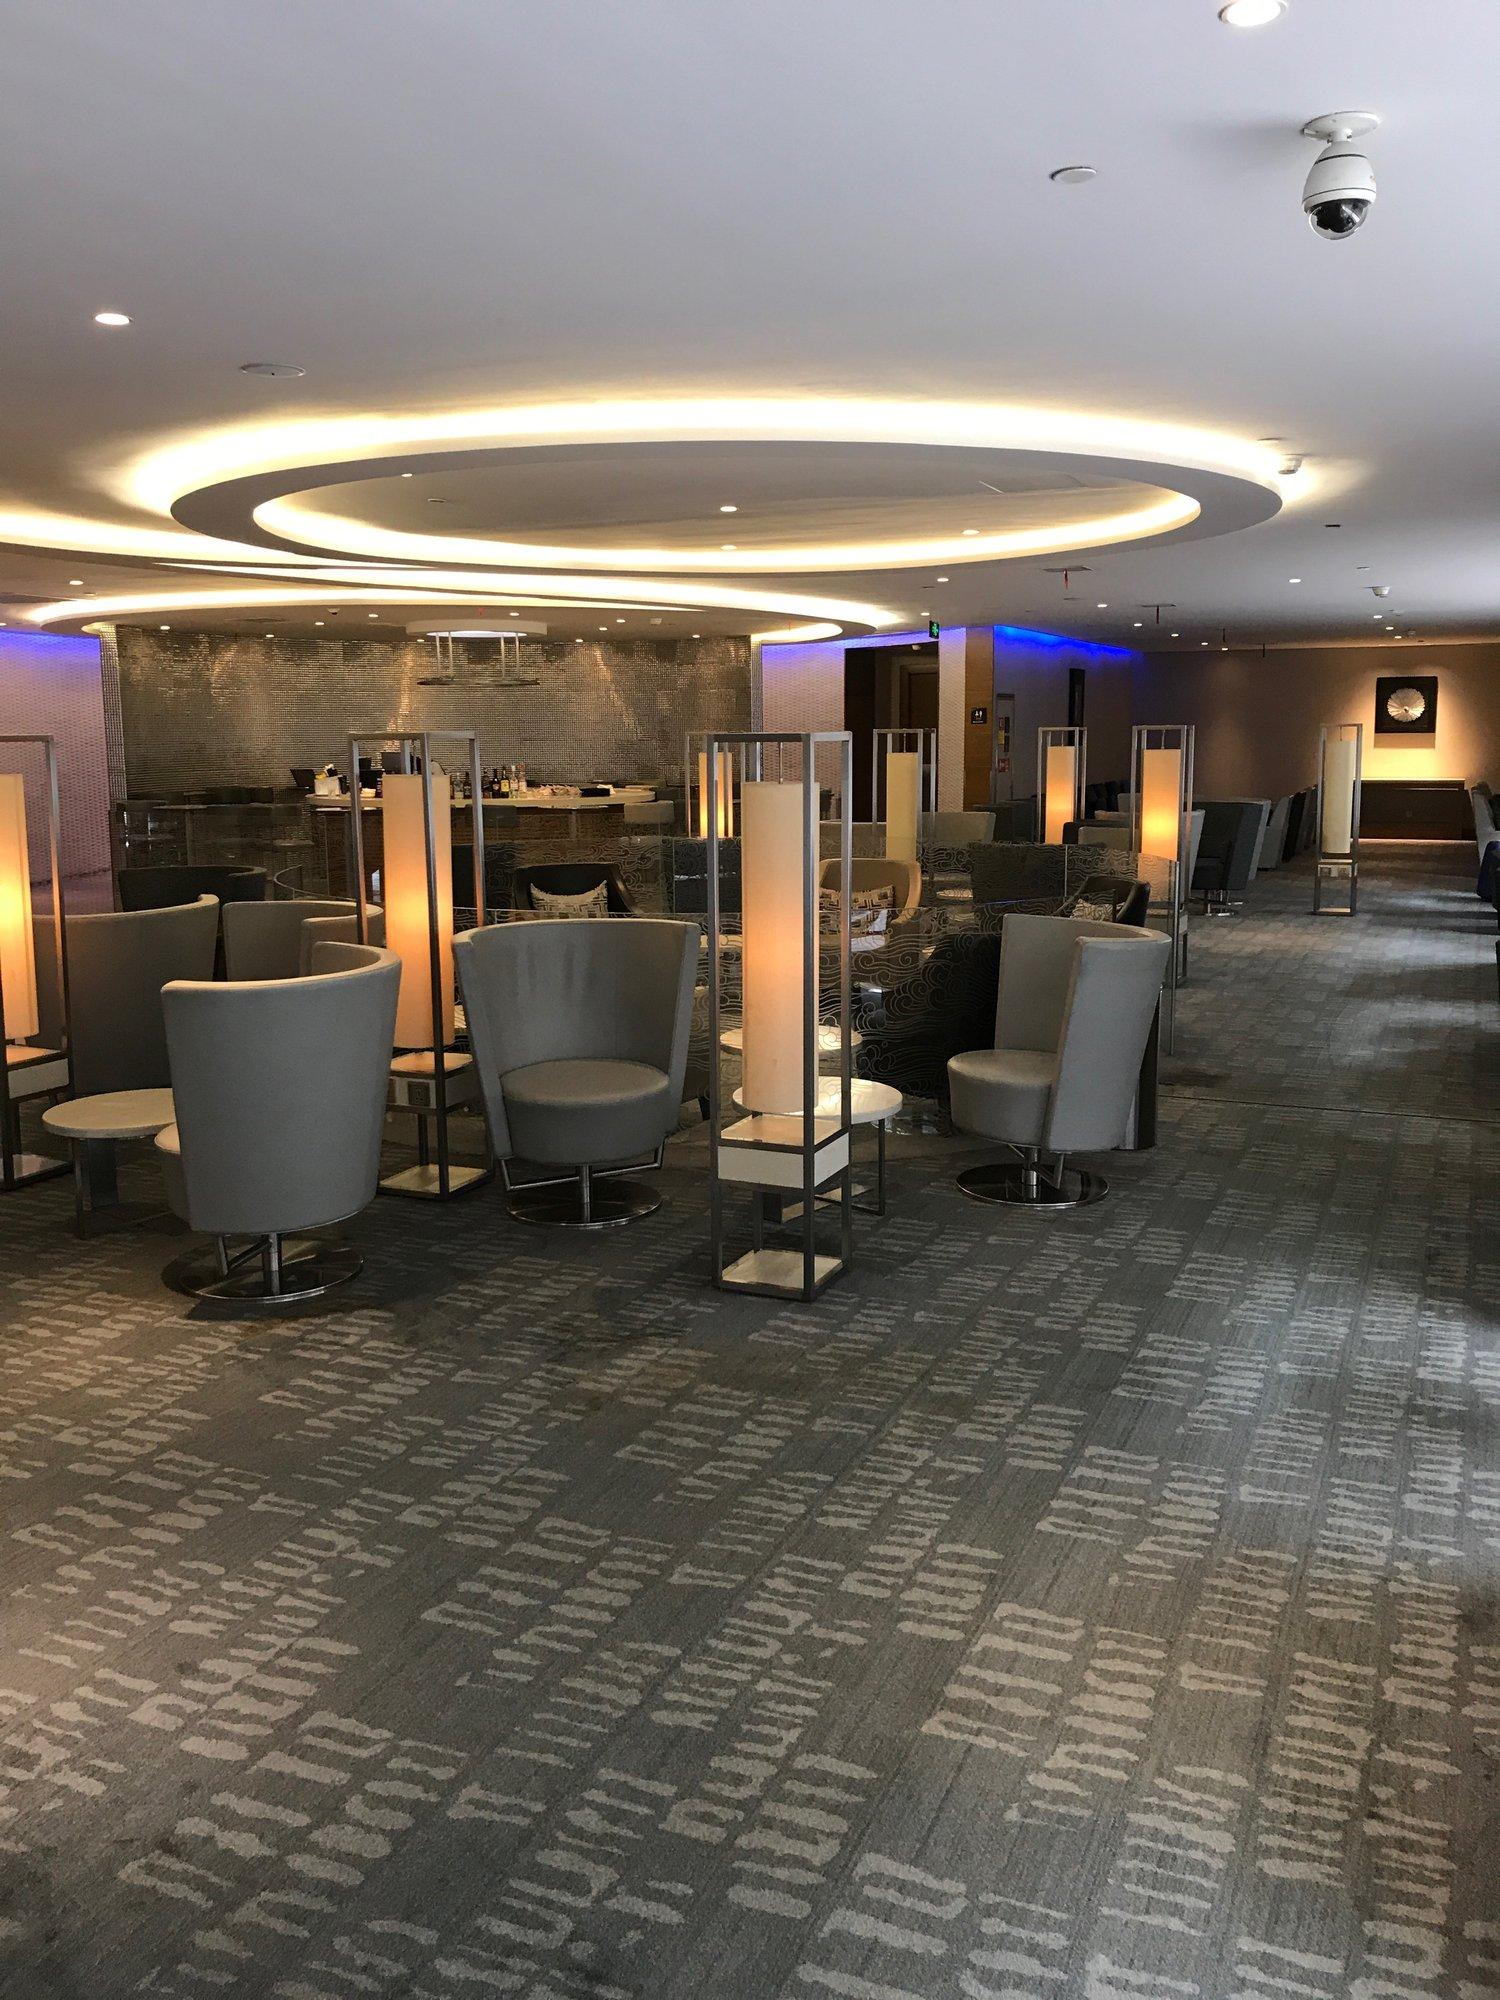 No. 71 Air China Business Class Lounge image 2 of 9